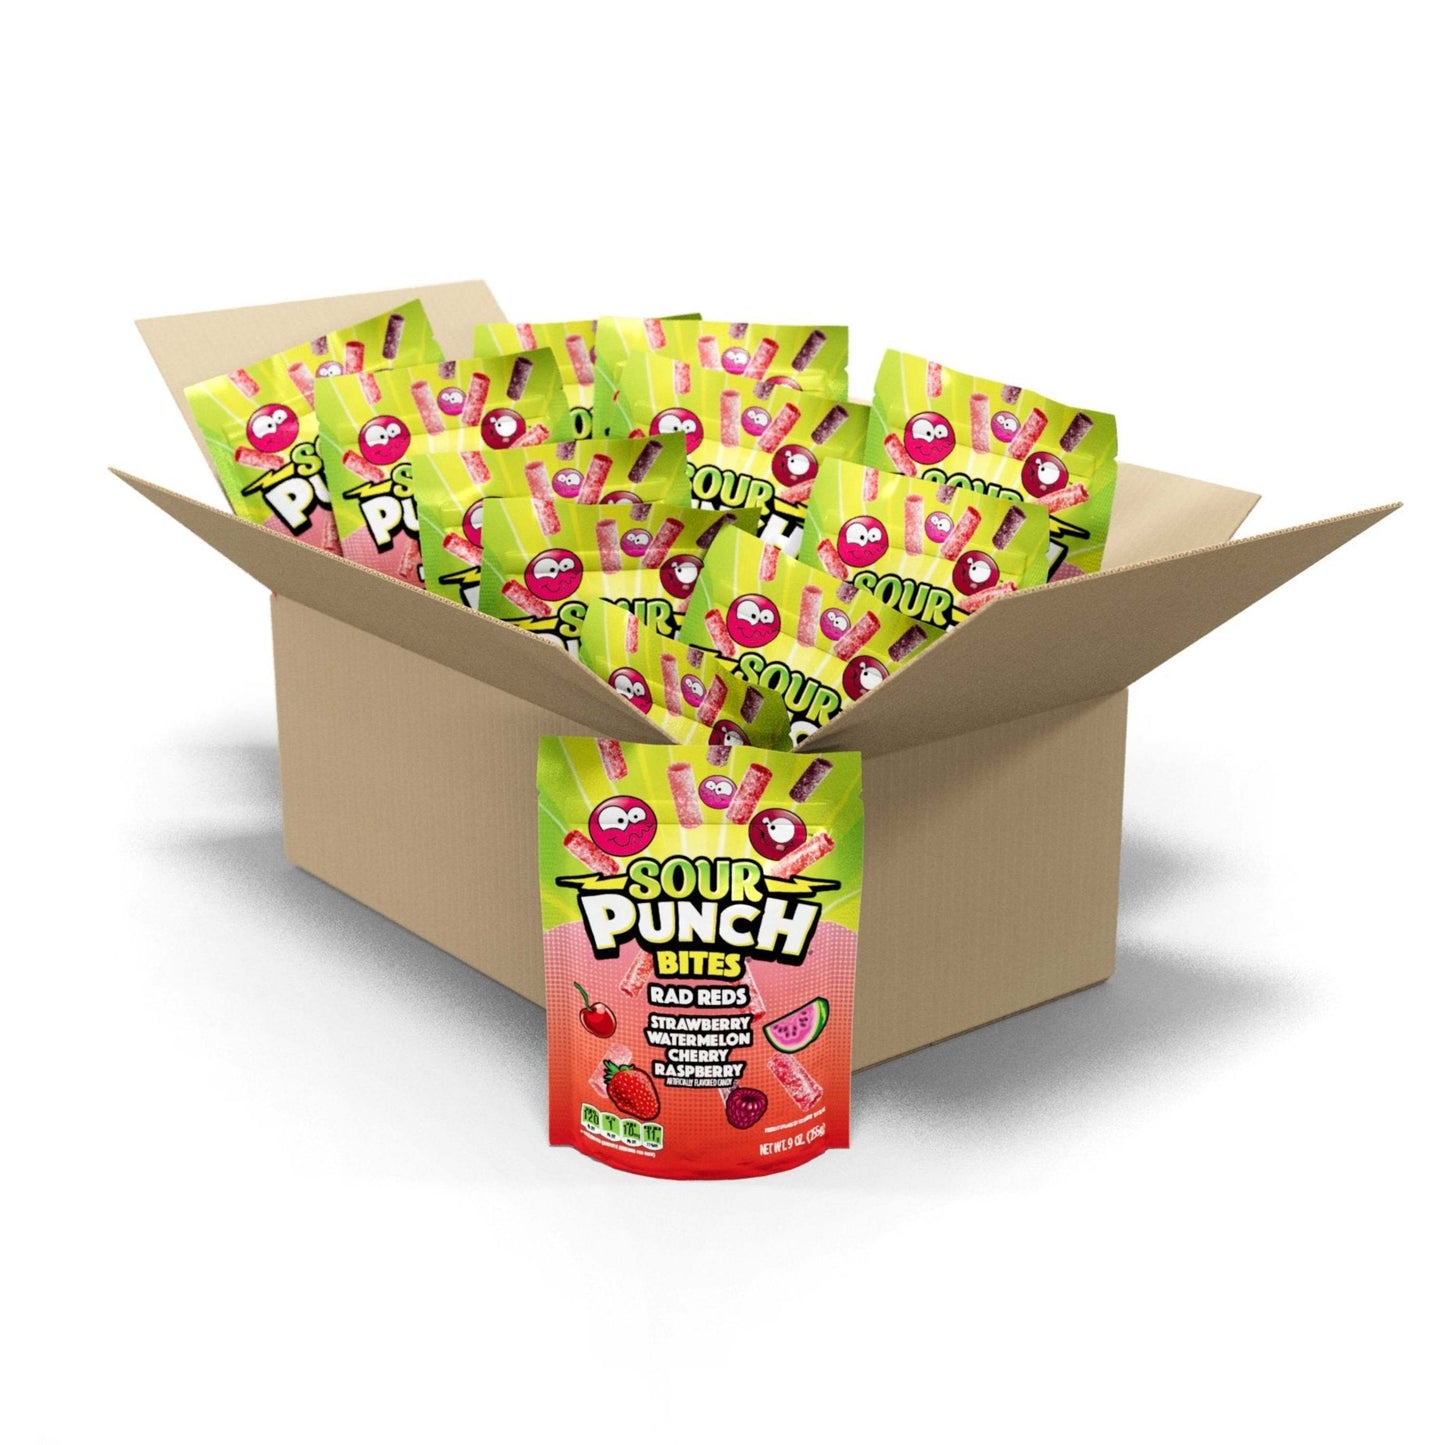 12 count box of Sour Punch Bites Rad Reds Candy 9oz bags